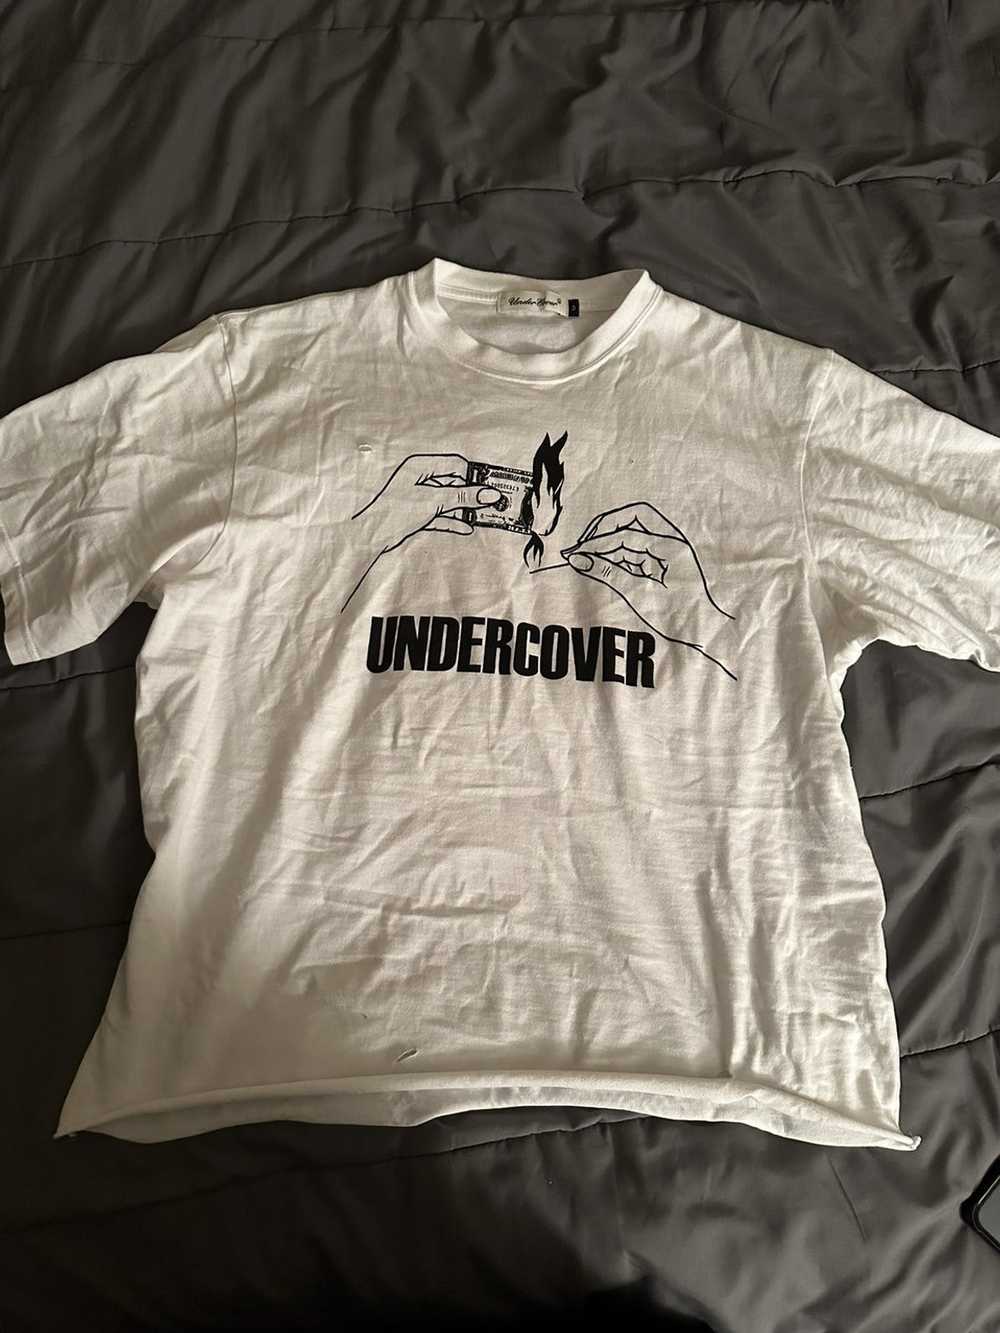 Japanese Brand × Undercover Undercover Tee - image 1